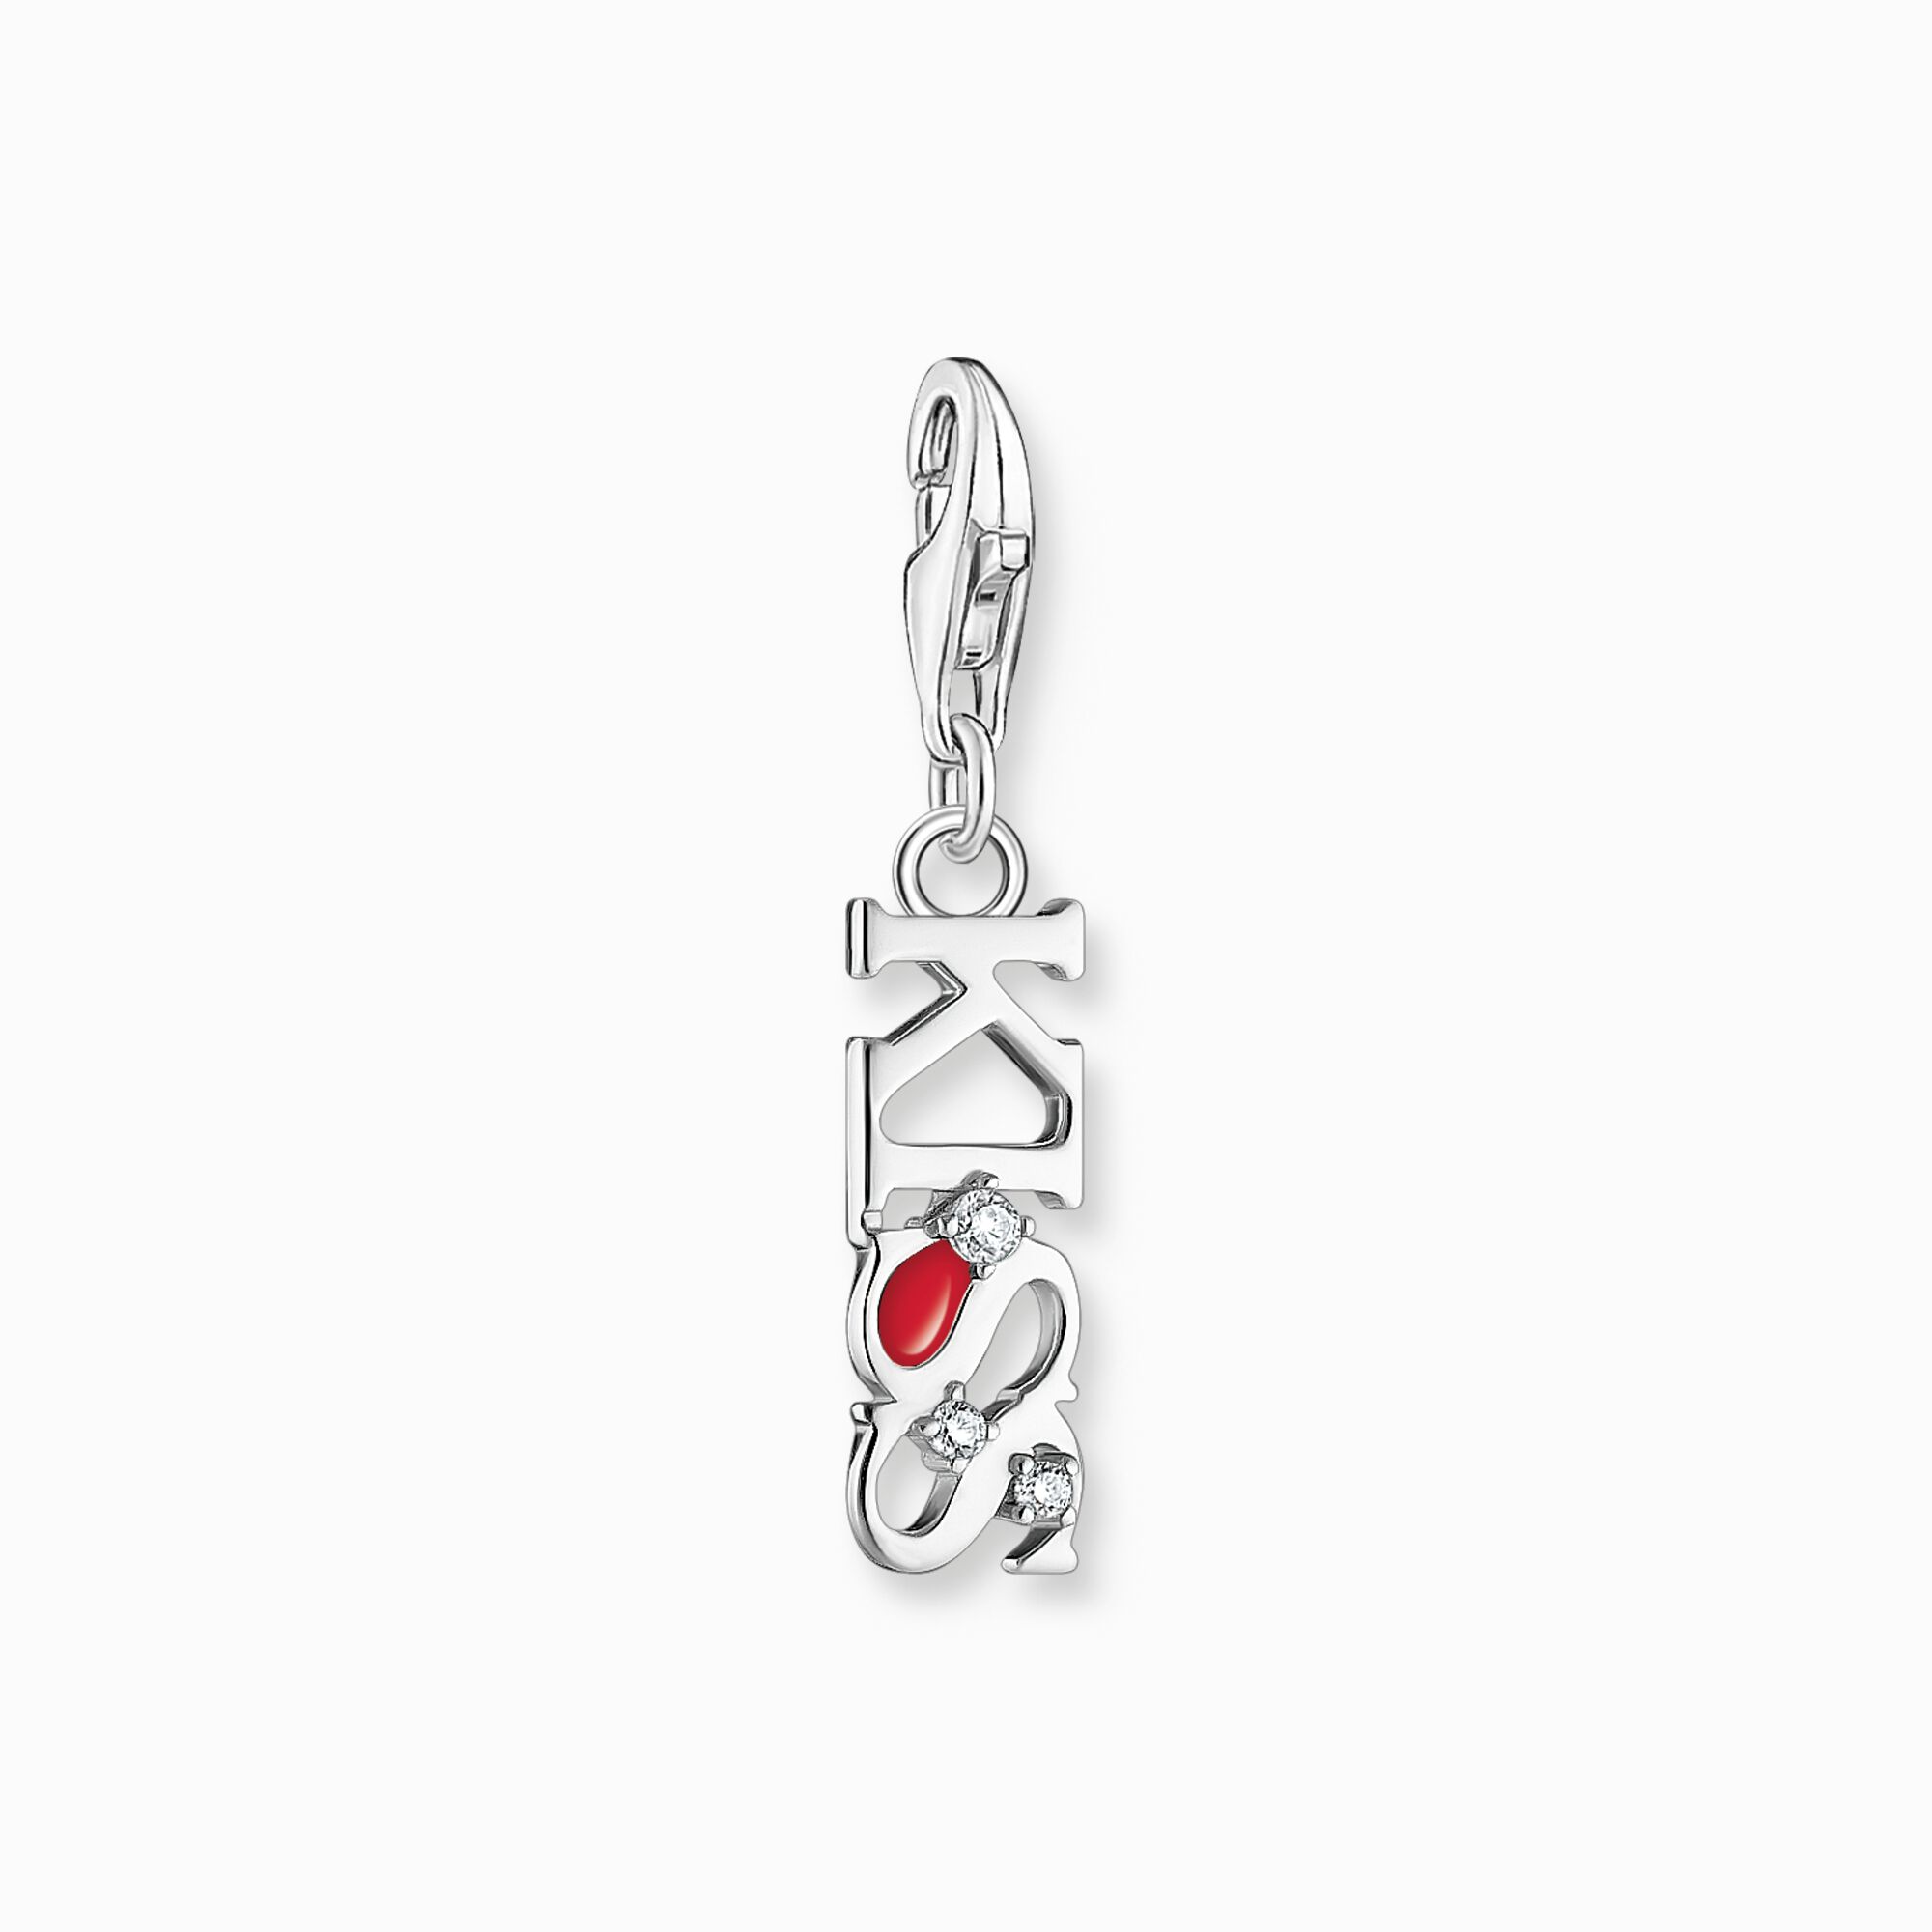 Silver charm pendant KISS with white zirconia from the Charm Club collection in the THOMAS SABO online store